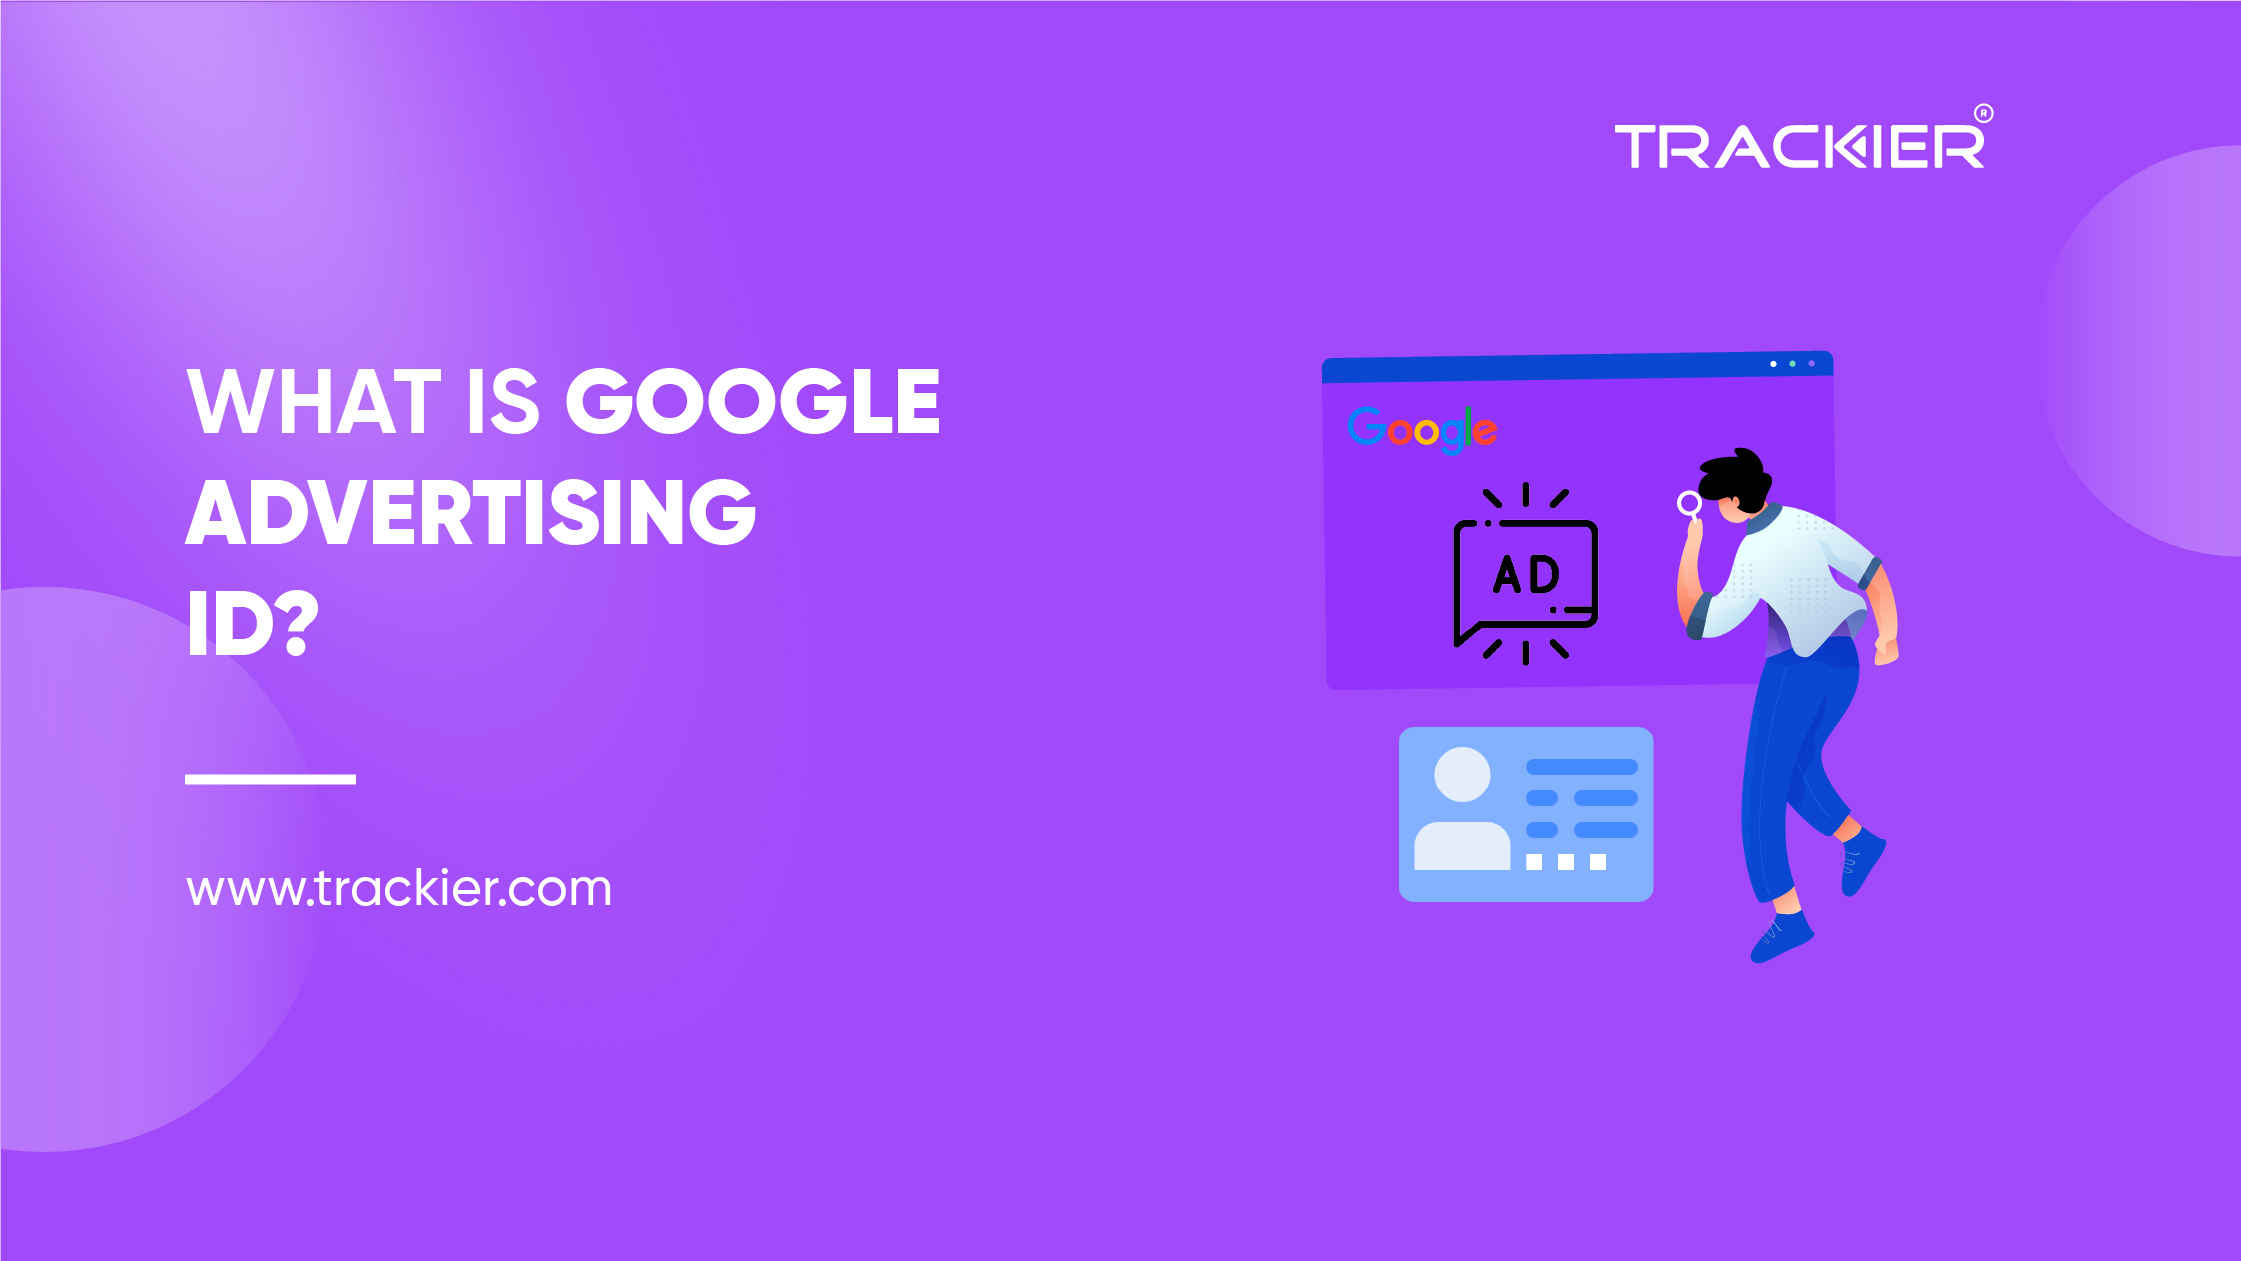 What Is Google Advertising ID?